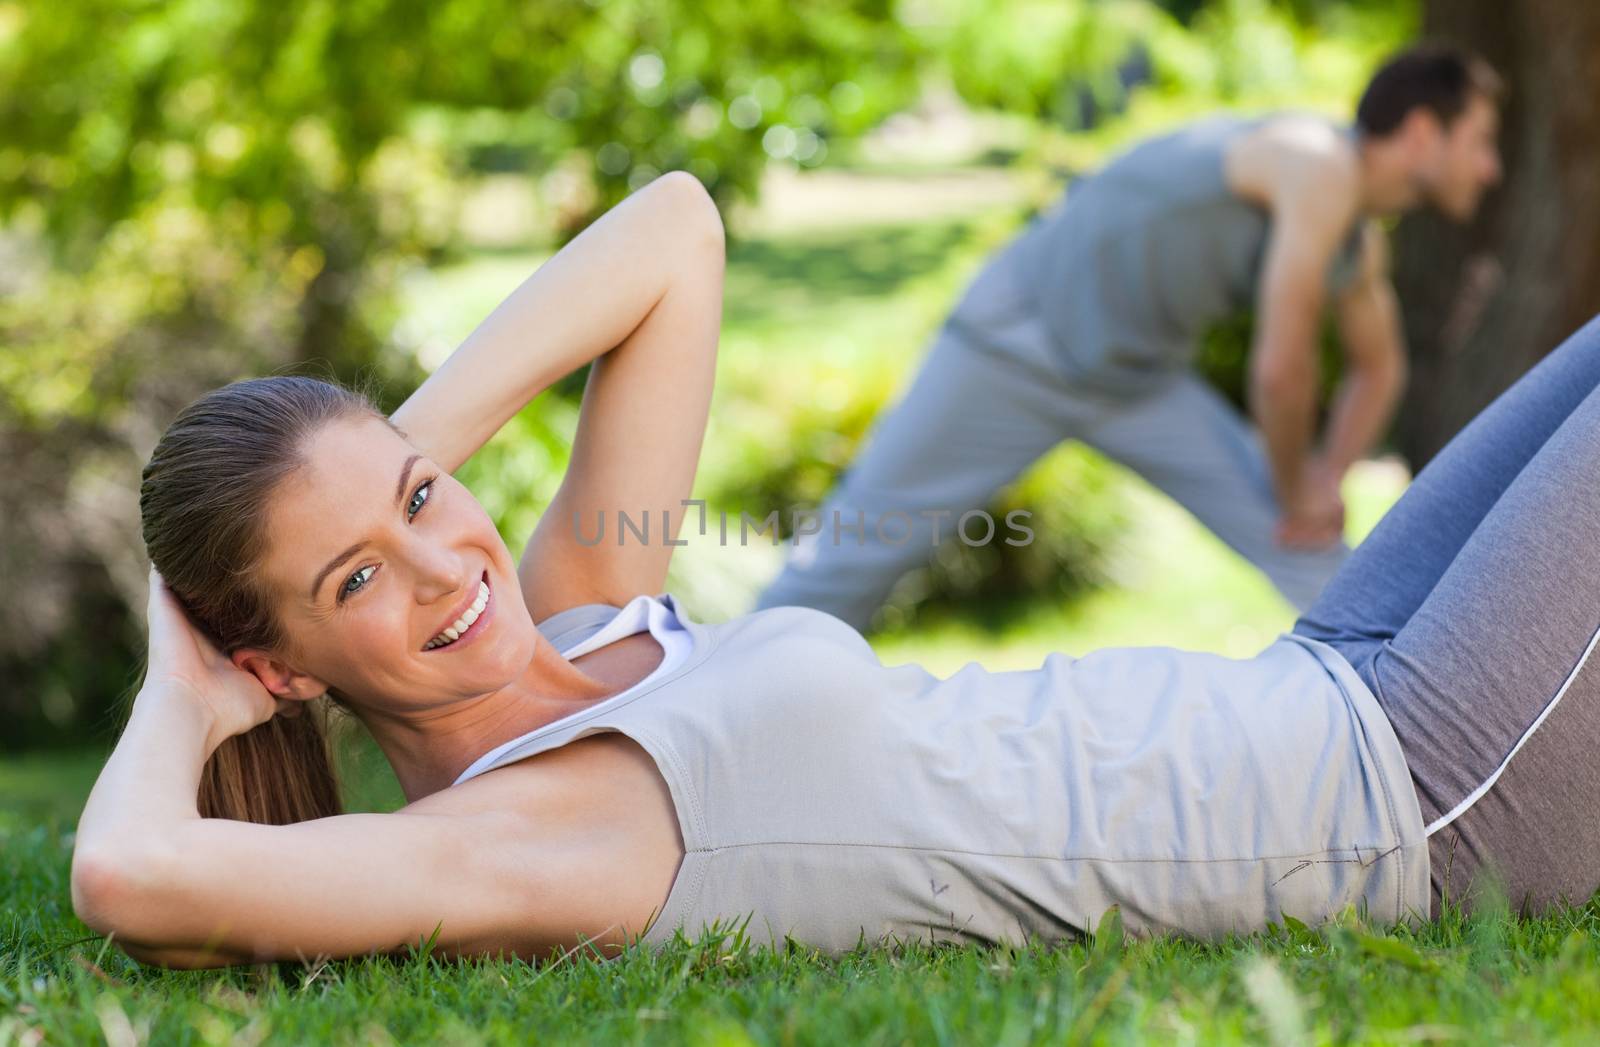 Couple doing their stretches in the park during the summer